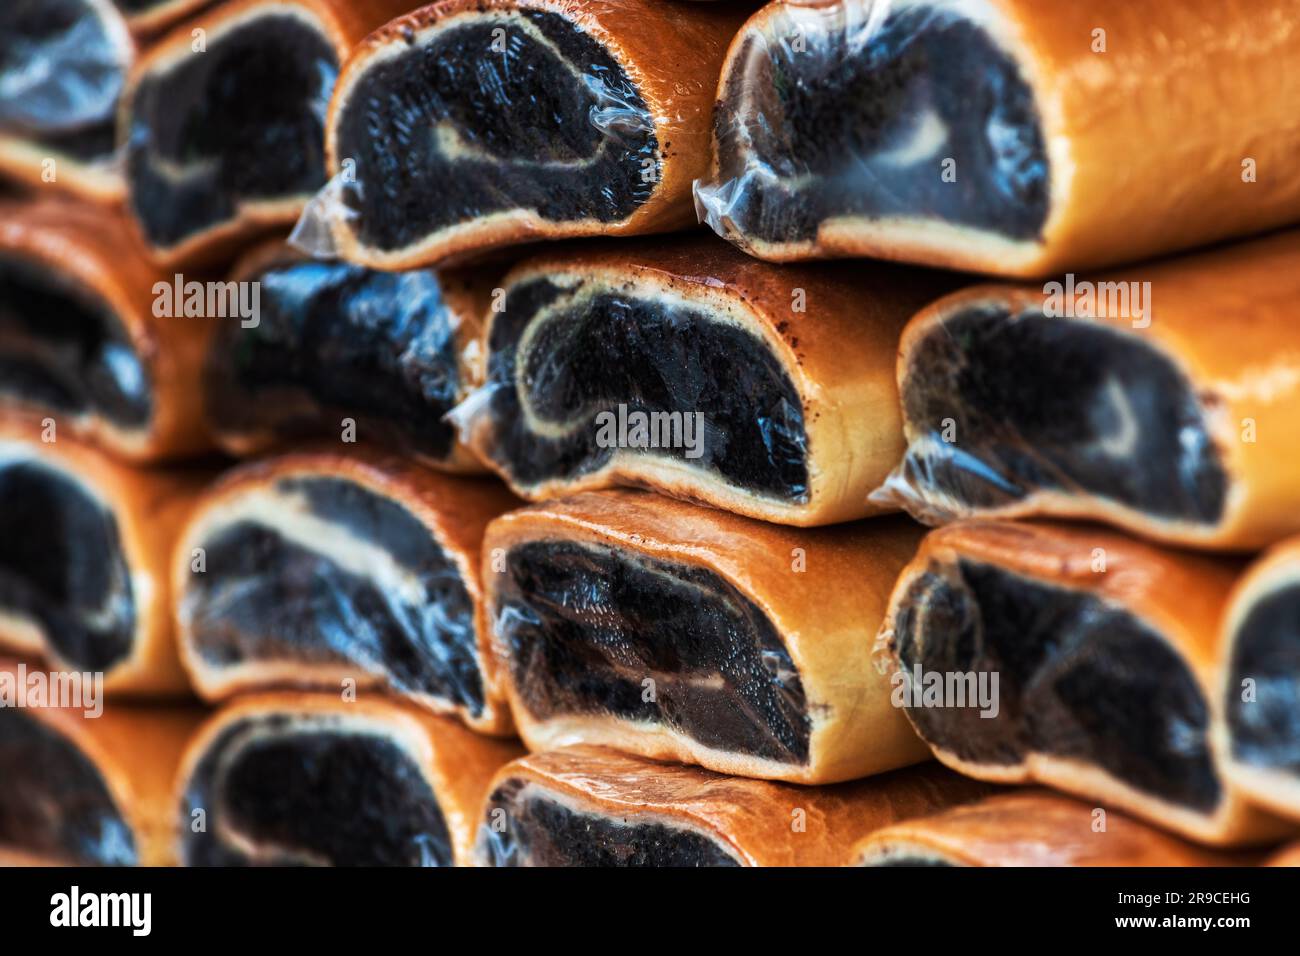 Poppy seed roll cake also known as strudel wrapped in plastic on outdoor street market, selective focus Stock Photo